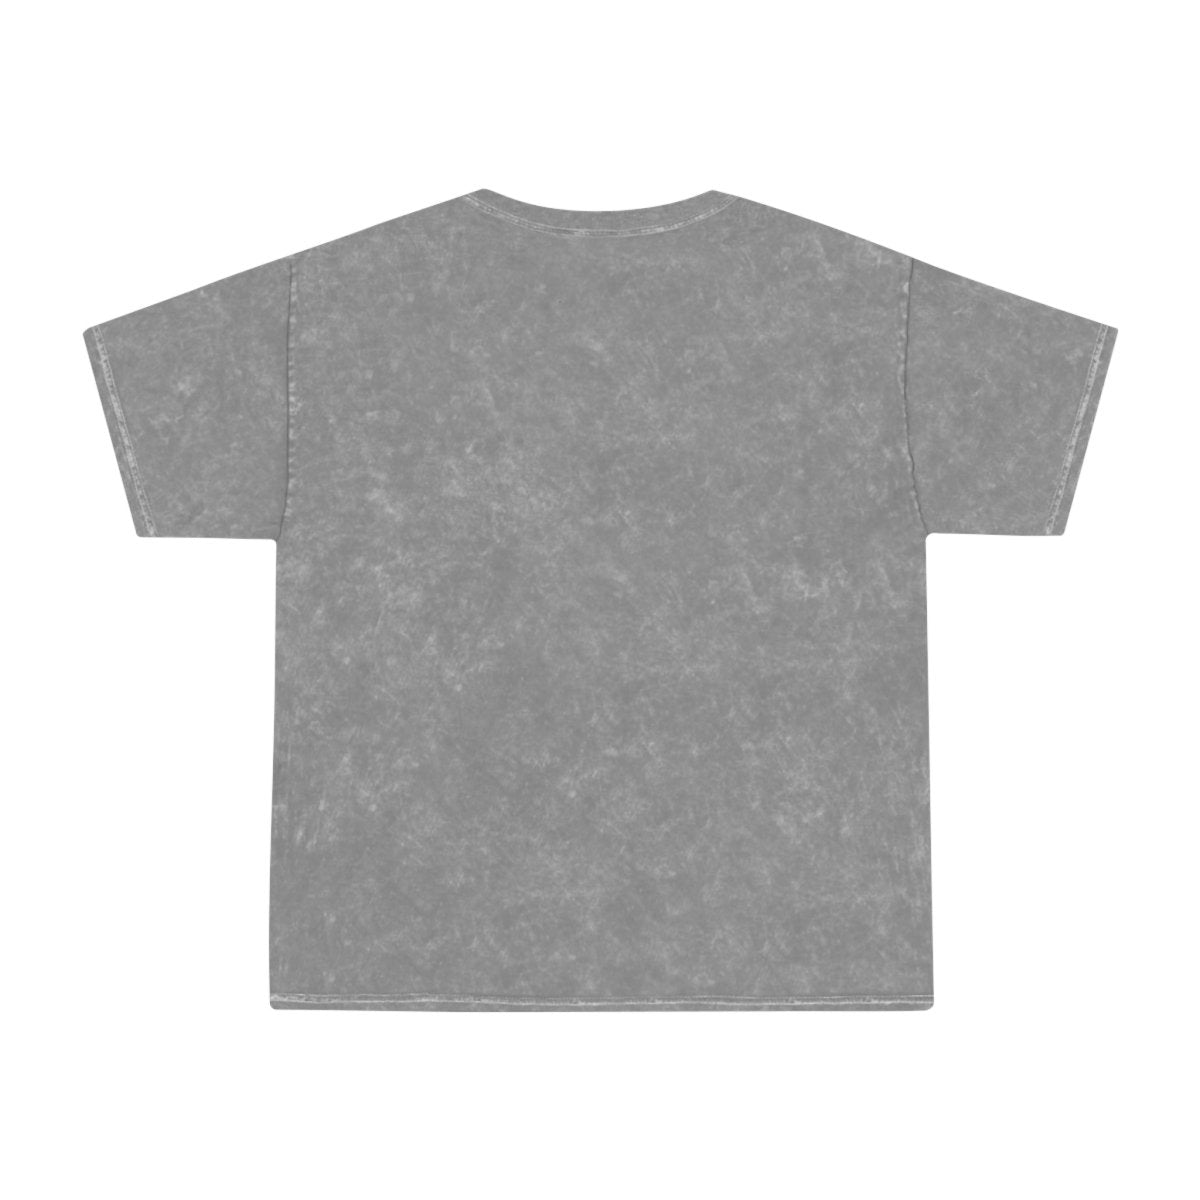 Royal Cat Mineral Wash T-Shirt - Style B - DarzyStore